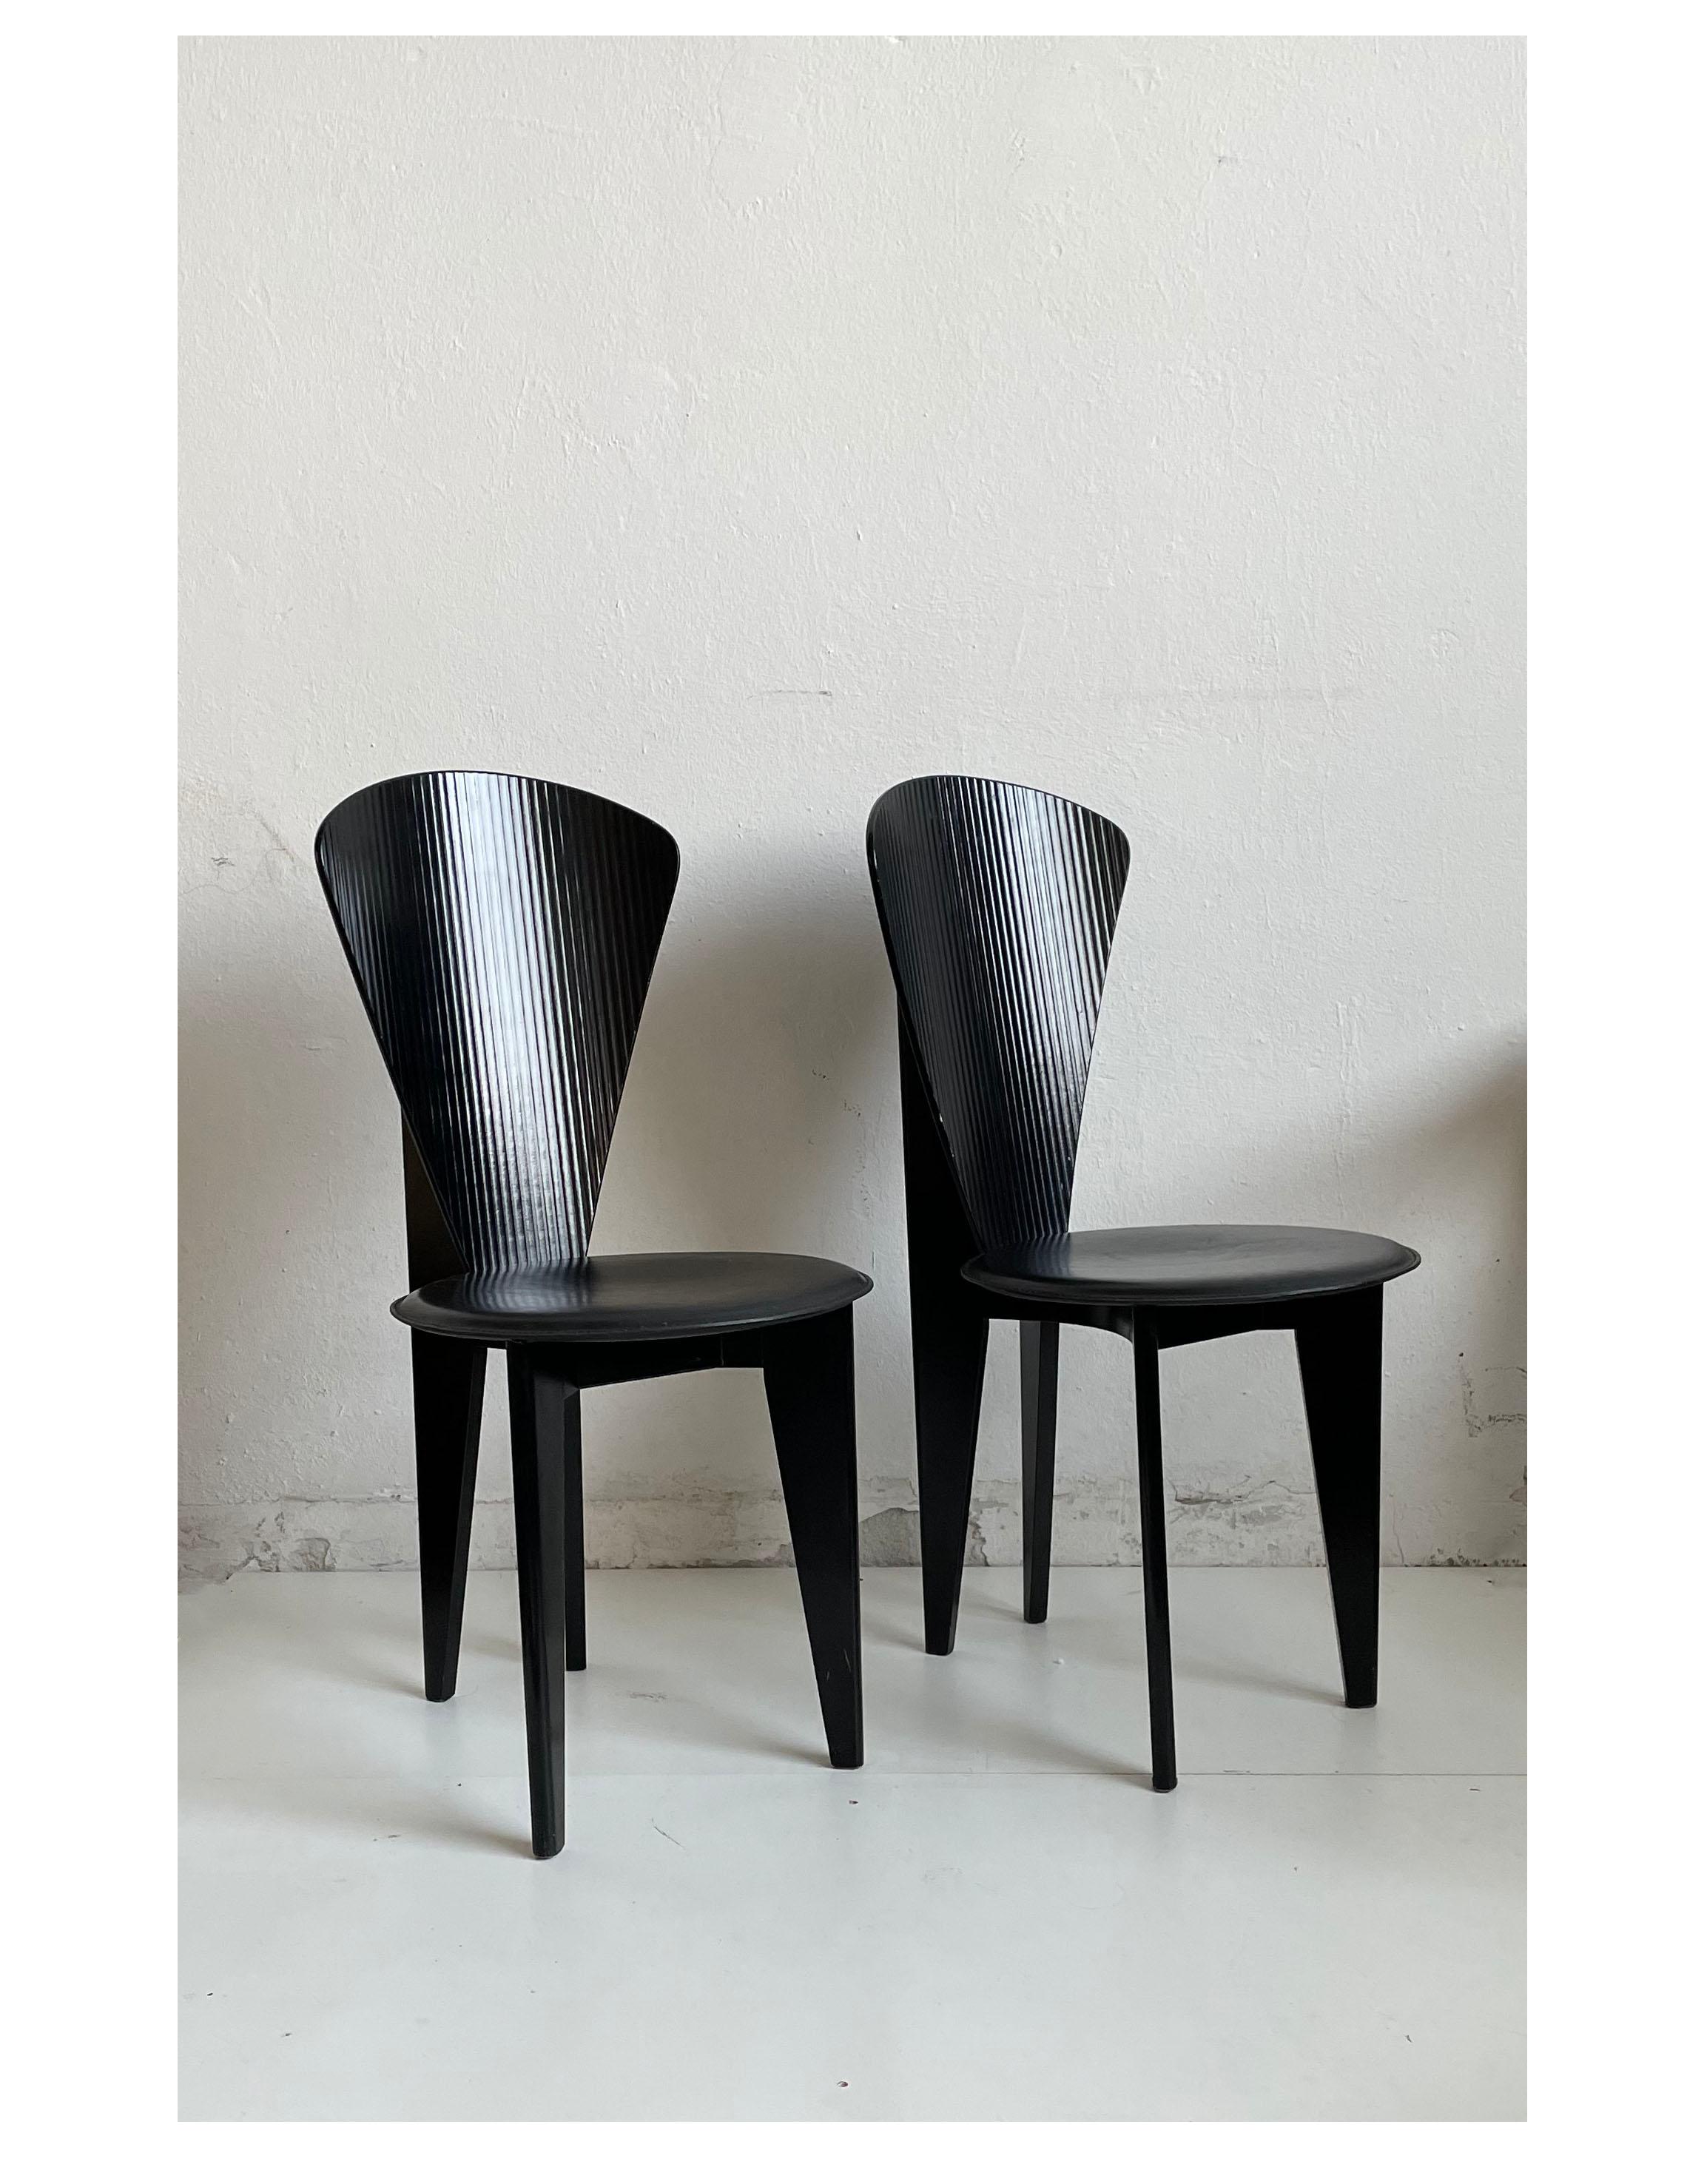 Late 20th Century Postmodern Italian Calligaris Dining Chairs, Black Leather and Wood, 1980s